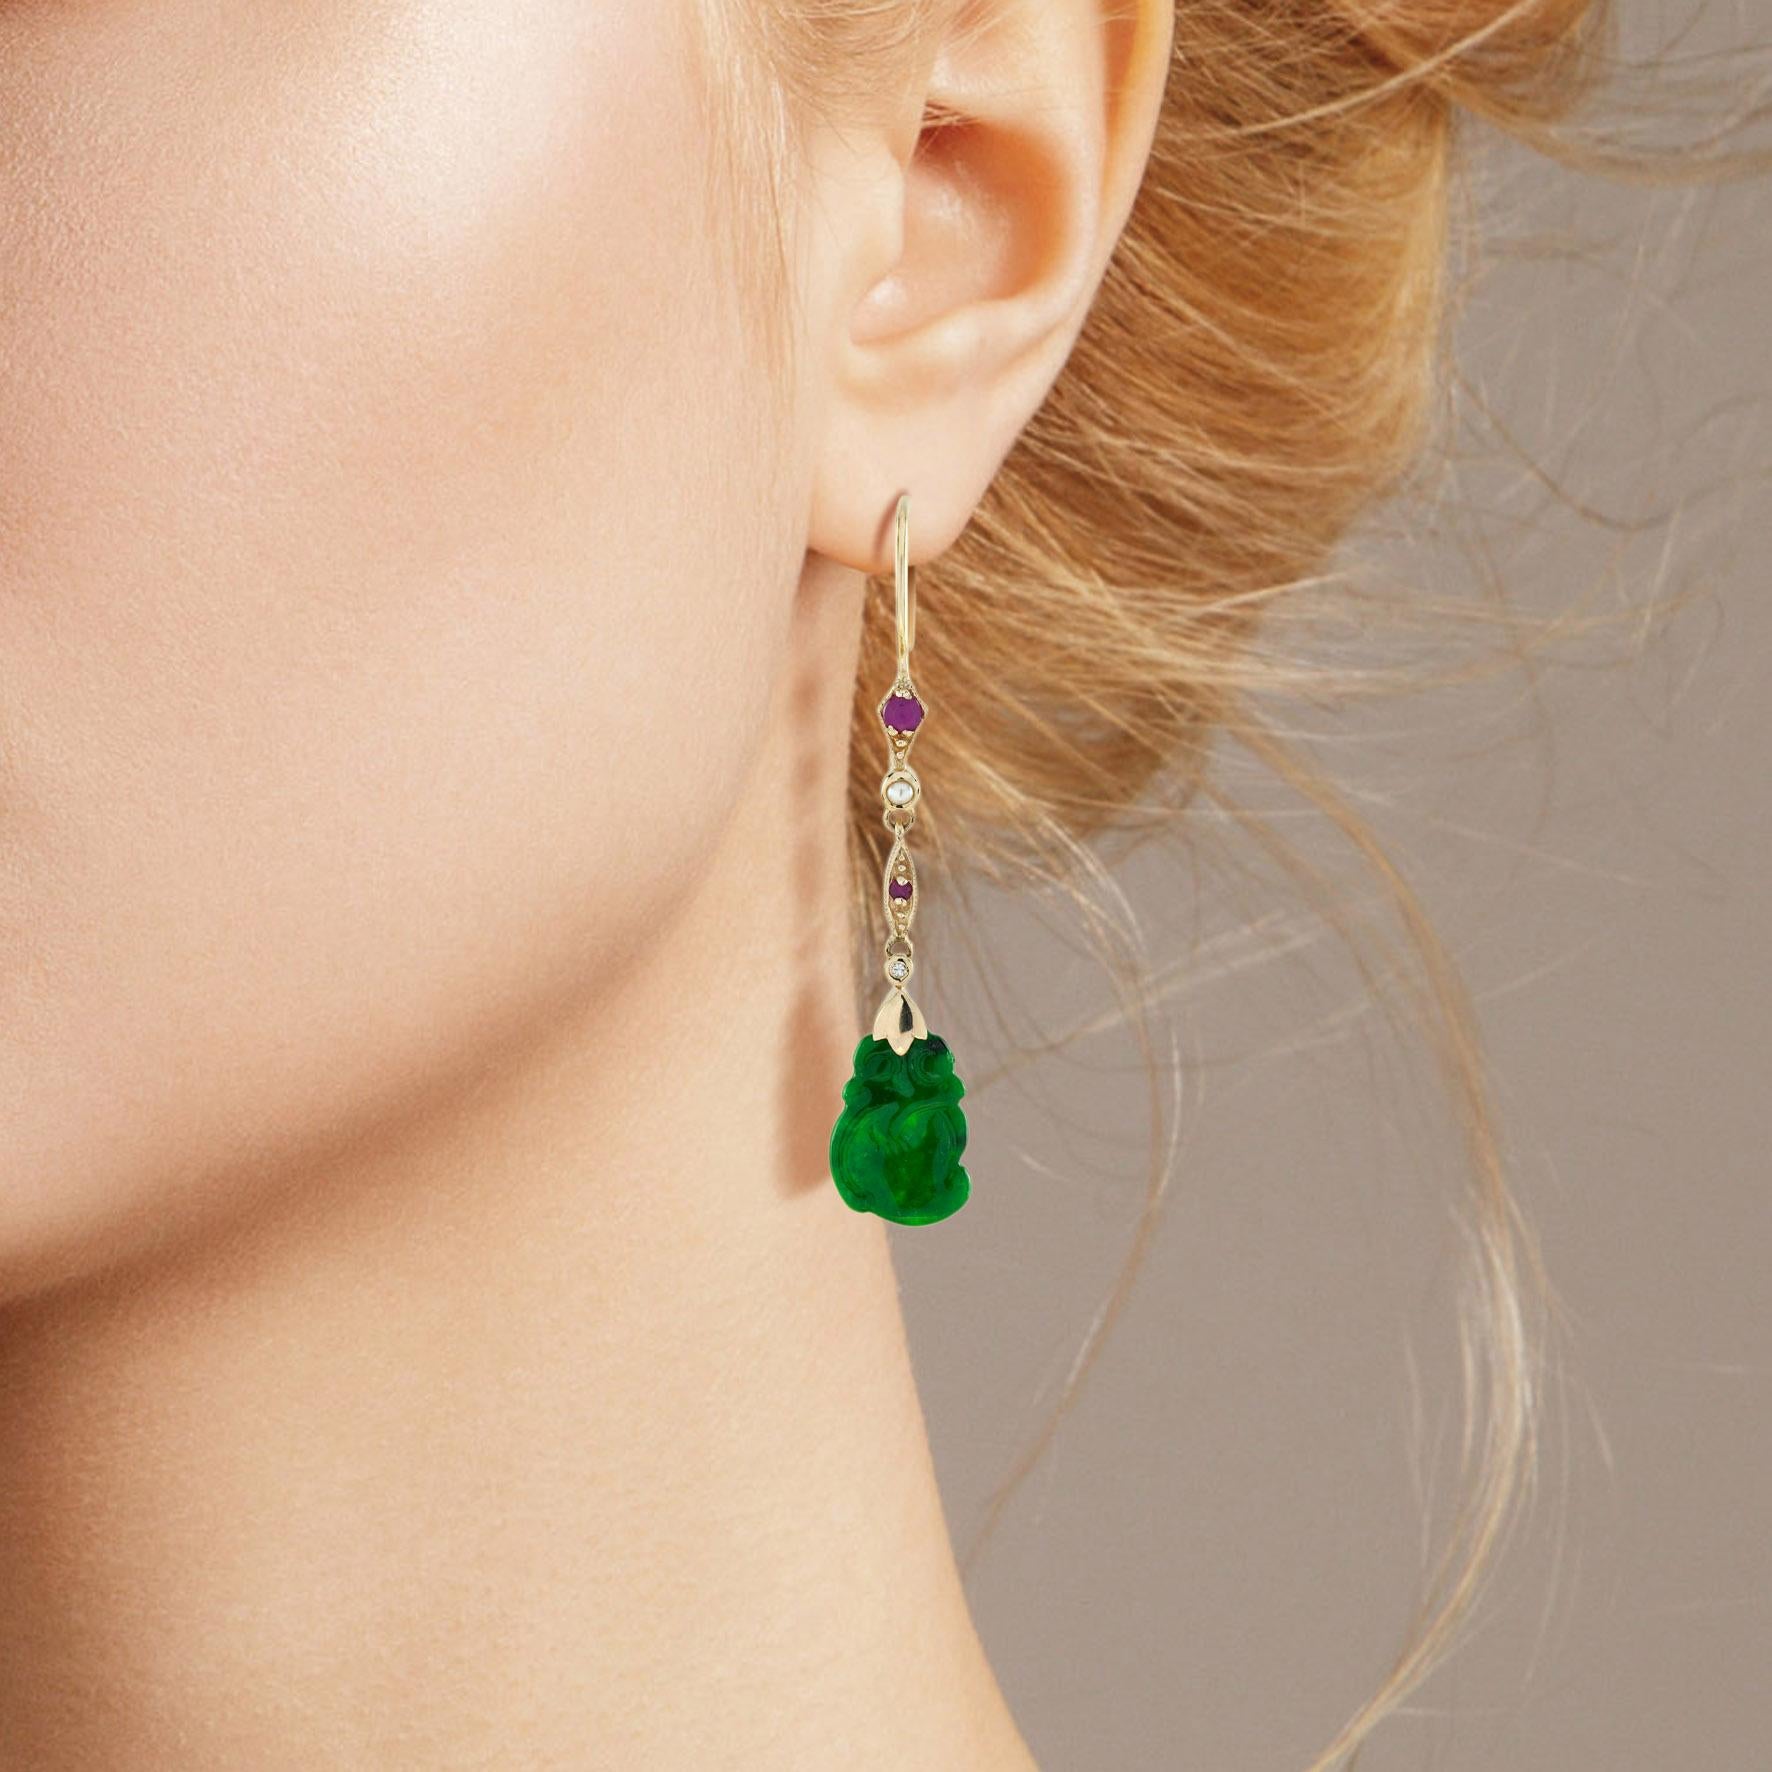 The natural jade in these lovely earrings has some very special shape. Both pieces have a strong green color and well carvings. The jade is suspended in a 9k yellow gold setting with ruby, pearl and diamond link on the top. The earrings transfer